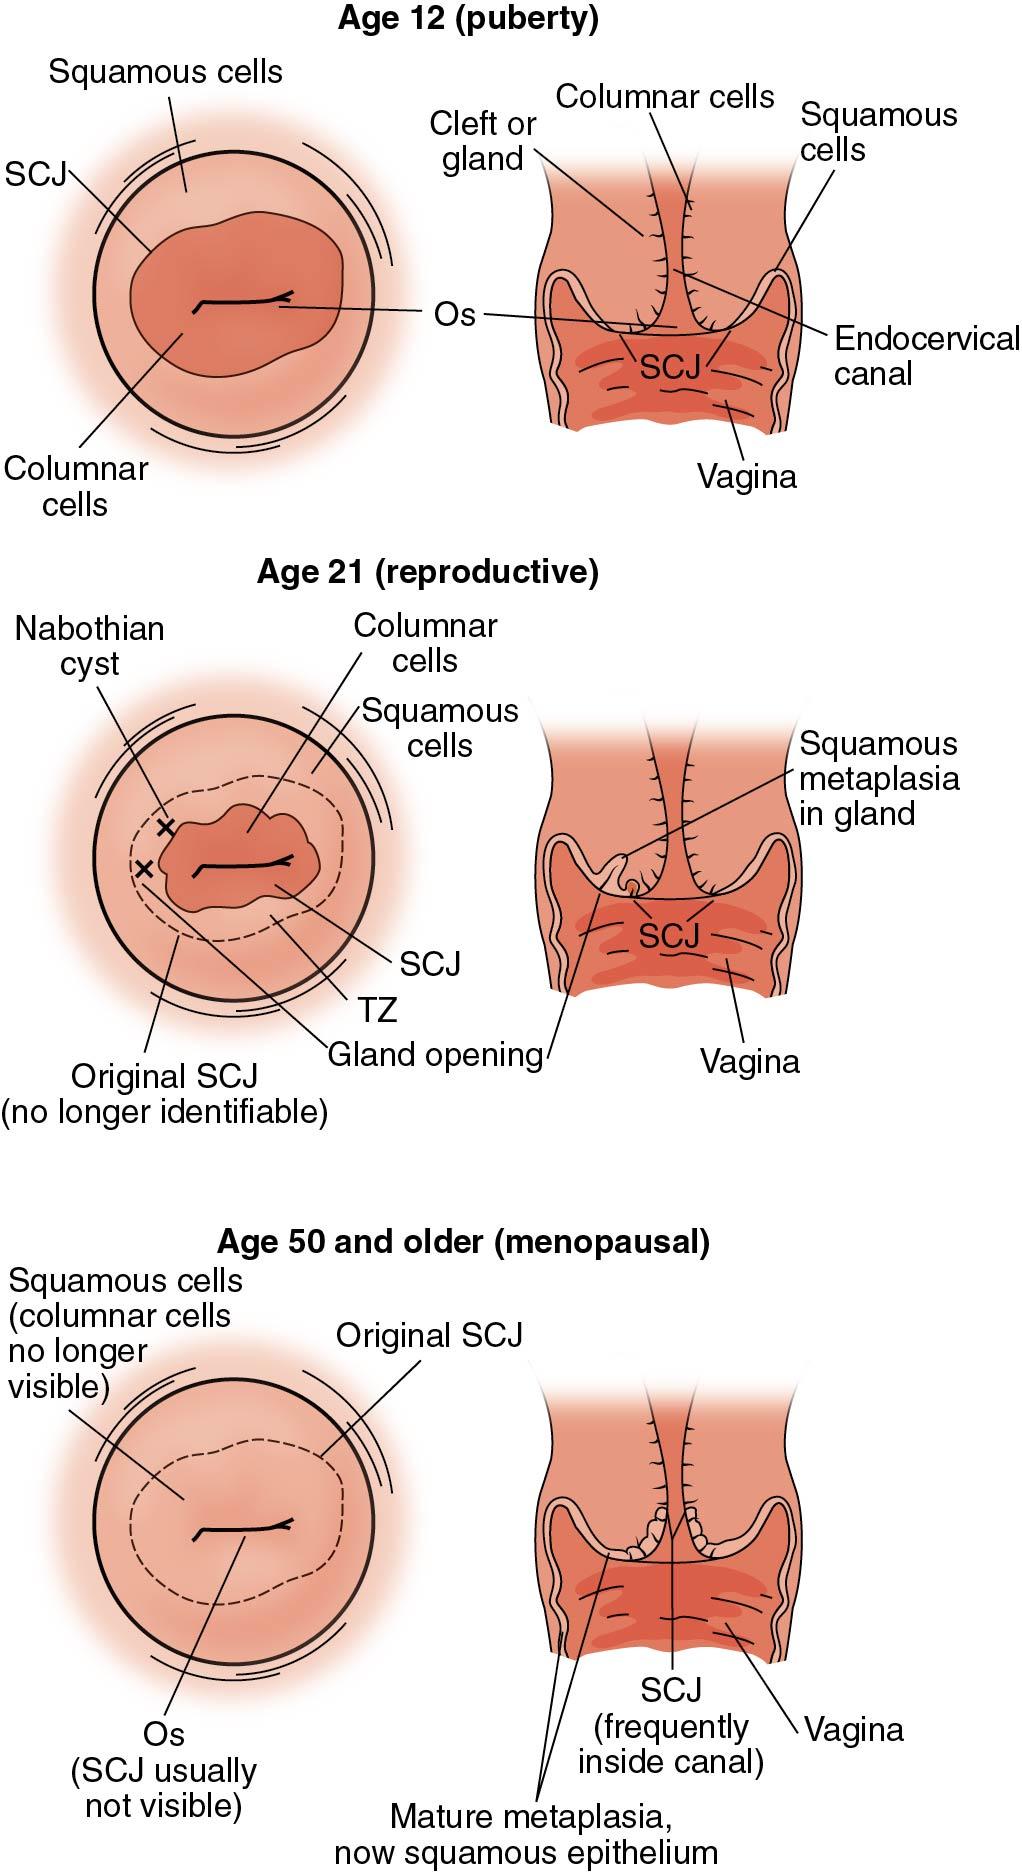 Fig. 3.14, A schematic drawing showing the migration of the transformation zone as a women ages. The first schematic shows a larger more robust squamocolumnar junction (SCJ). During the reproductive years the glands open, the SCJ migrates slightly inward, and on examination Nabothian cysts may be seen. During menopause the lack of estrogen causes the transformation zone to migrate higher up the endocervical canal. The SCJ is often lost into the cervical canal during menopause.